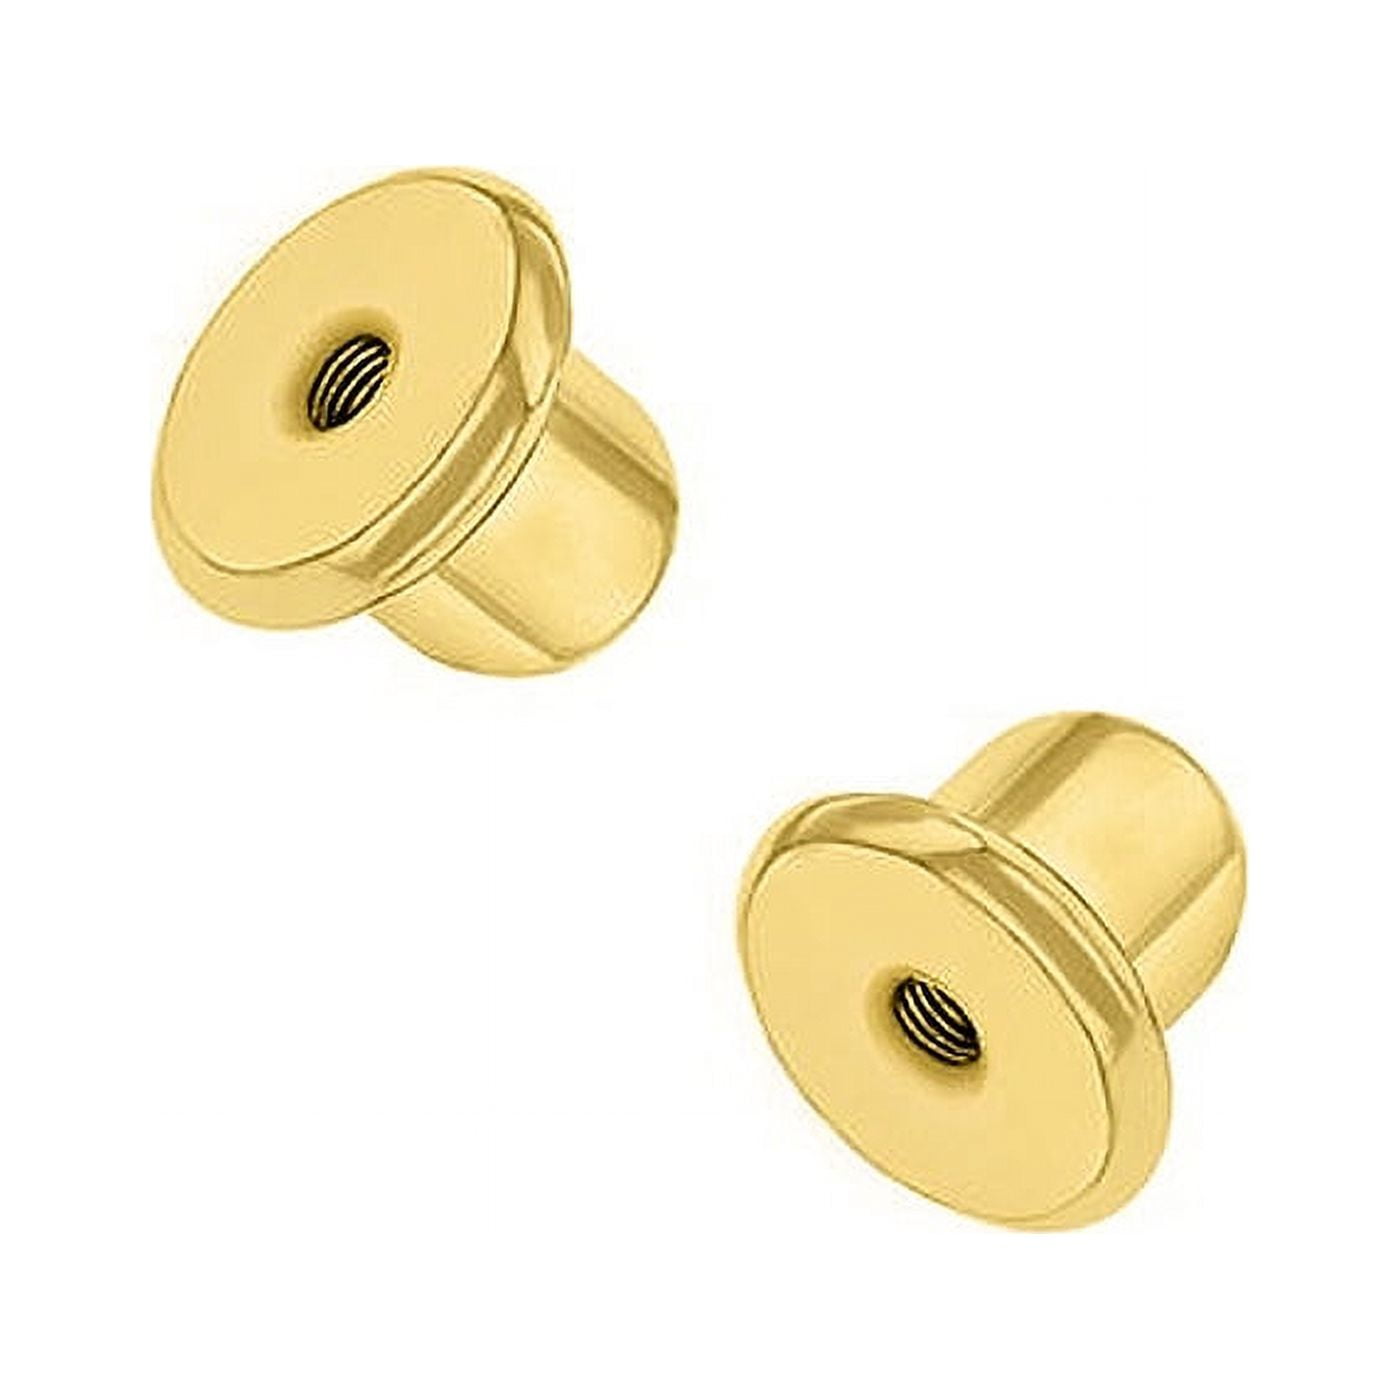 Replacement Pair (2) 14K Yellow Gold Earring Screw Backs Fits in Season Jewelry